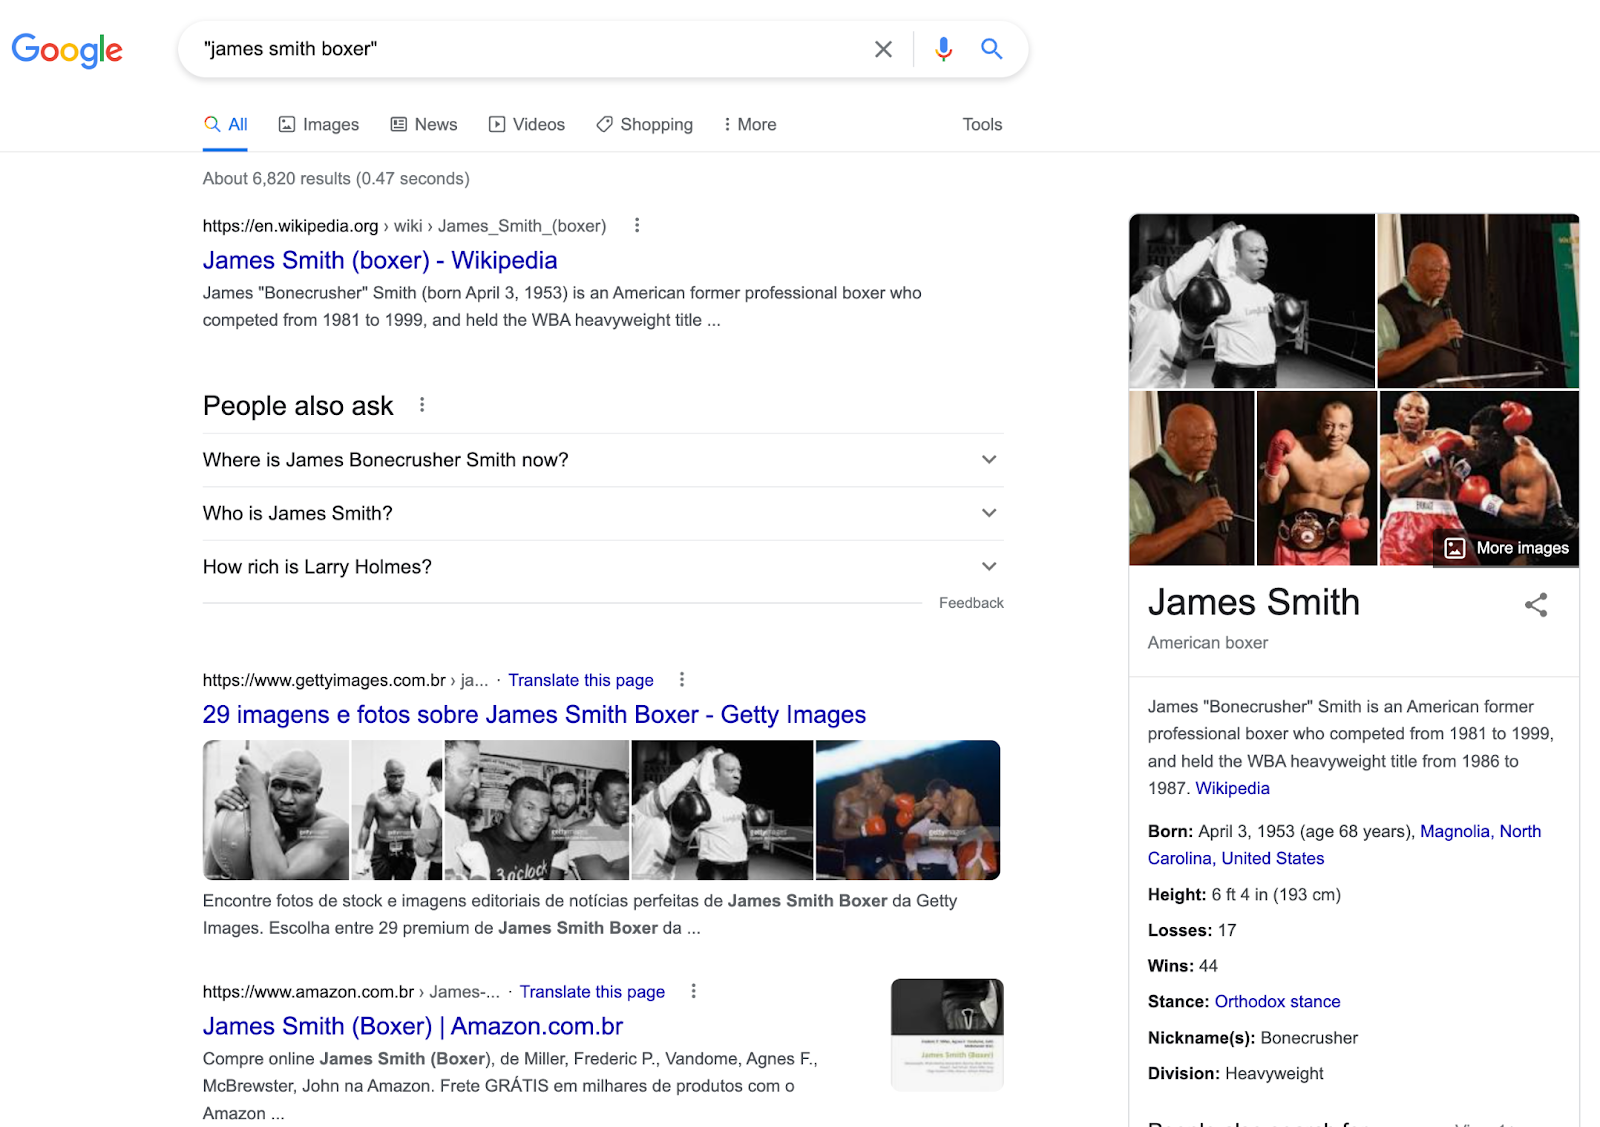 google exact match search showing the results